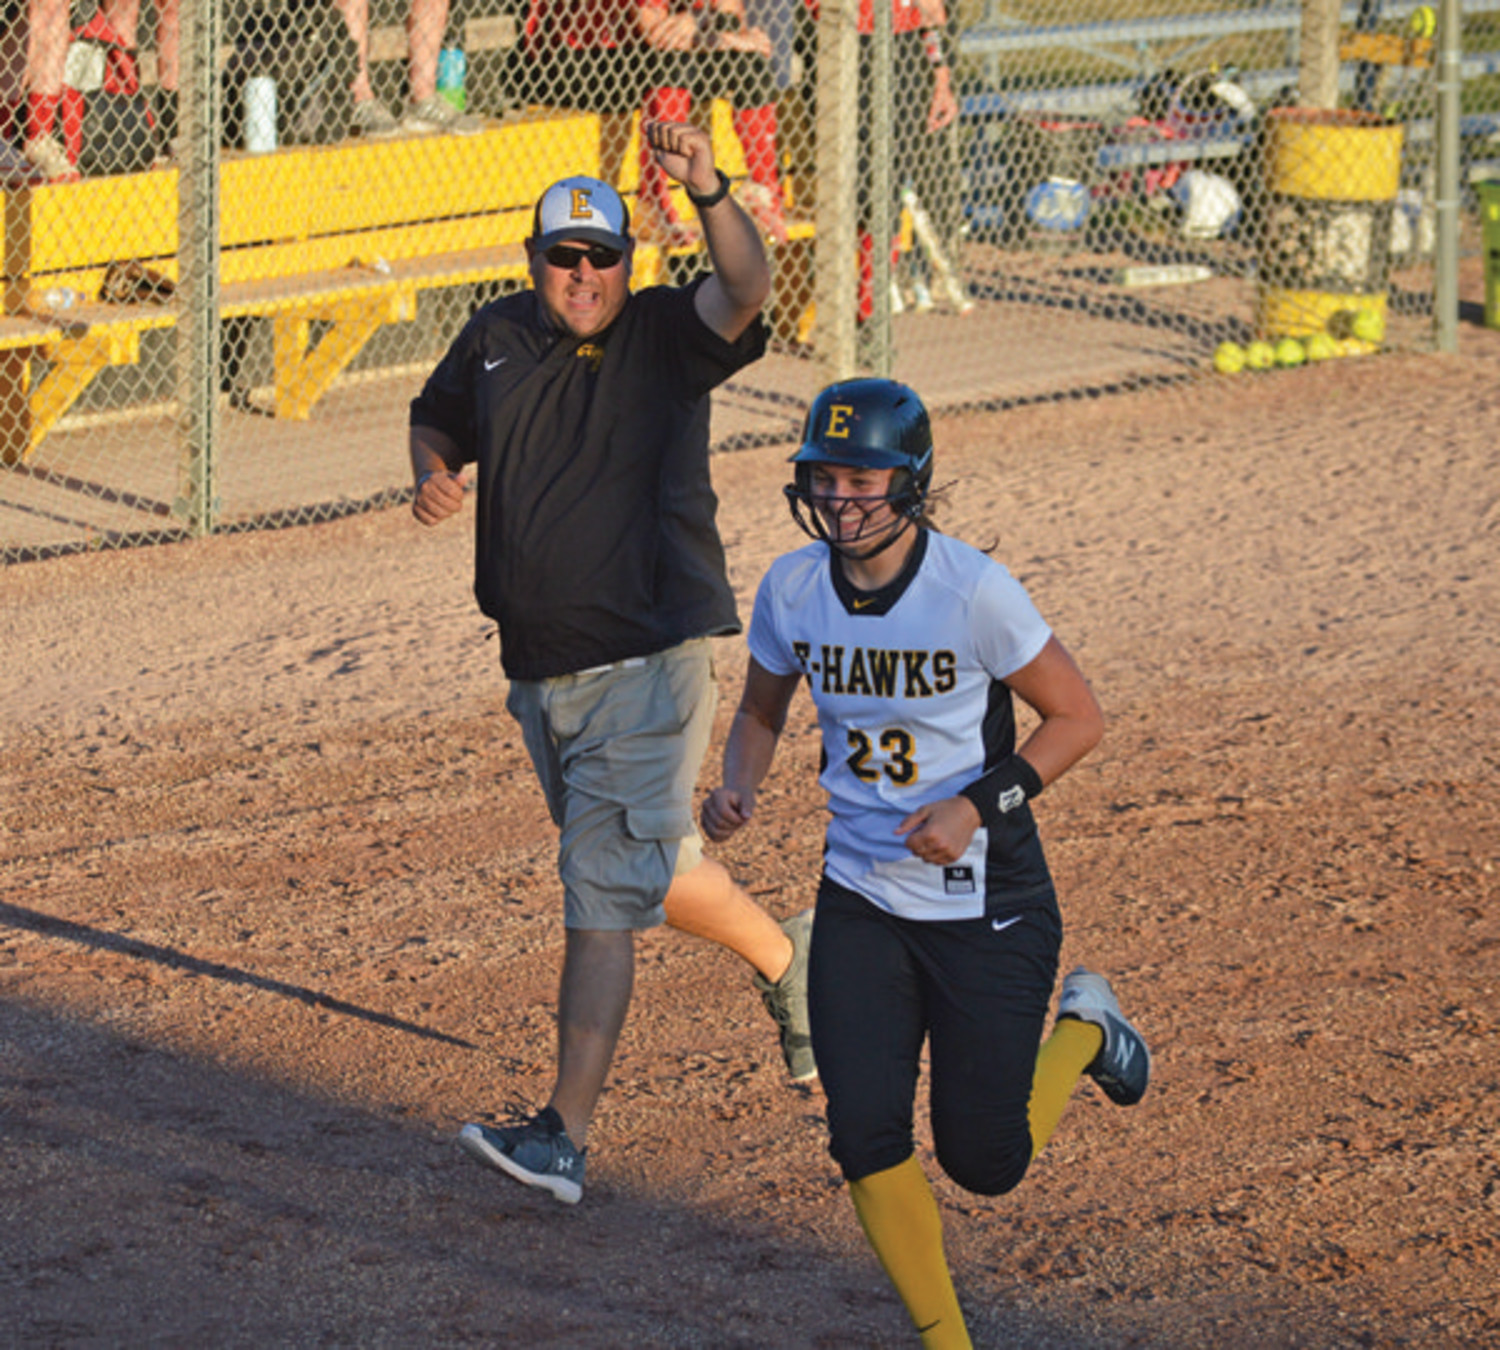 IT’S GONE! - Pictured above, Molly Schany smashes a long home run during Wednesday night’s 11-1 Lady E-Hawk win over East Sac County to close out the contest in the fifth inning. Rounding the bases, Schany was joined in celebration by head coach Travis Birkey. Schany went 2-for-2 at the plate during the game. --Joseph Schany photo